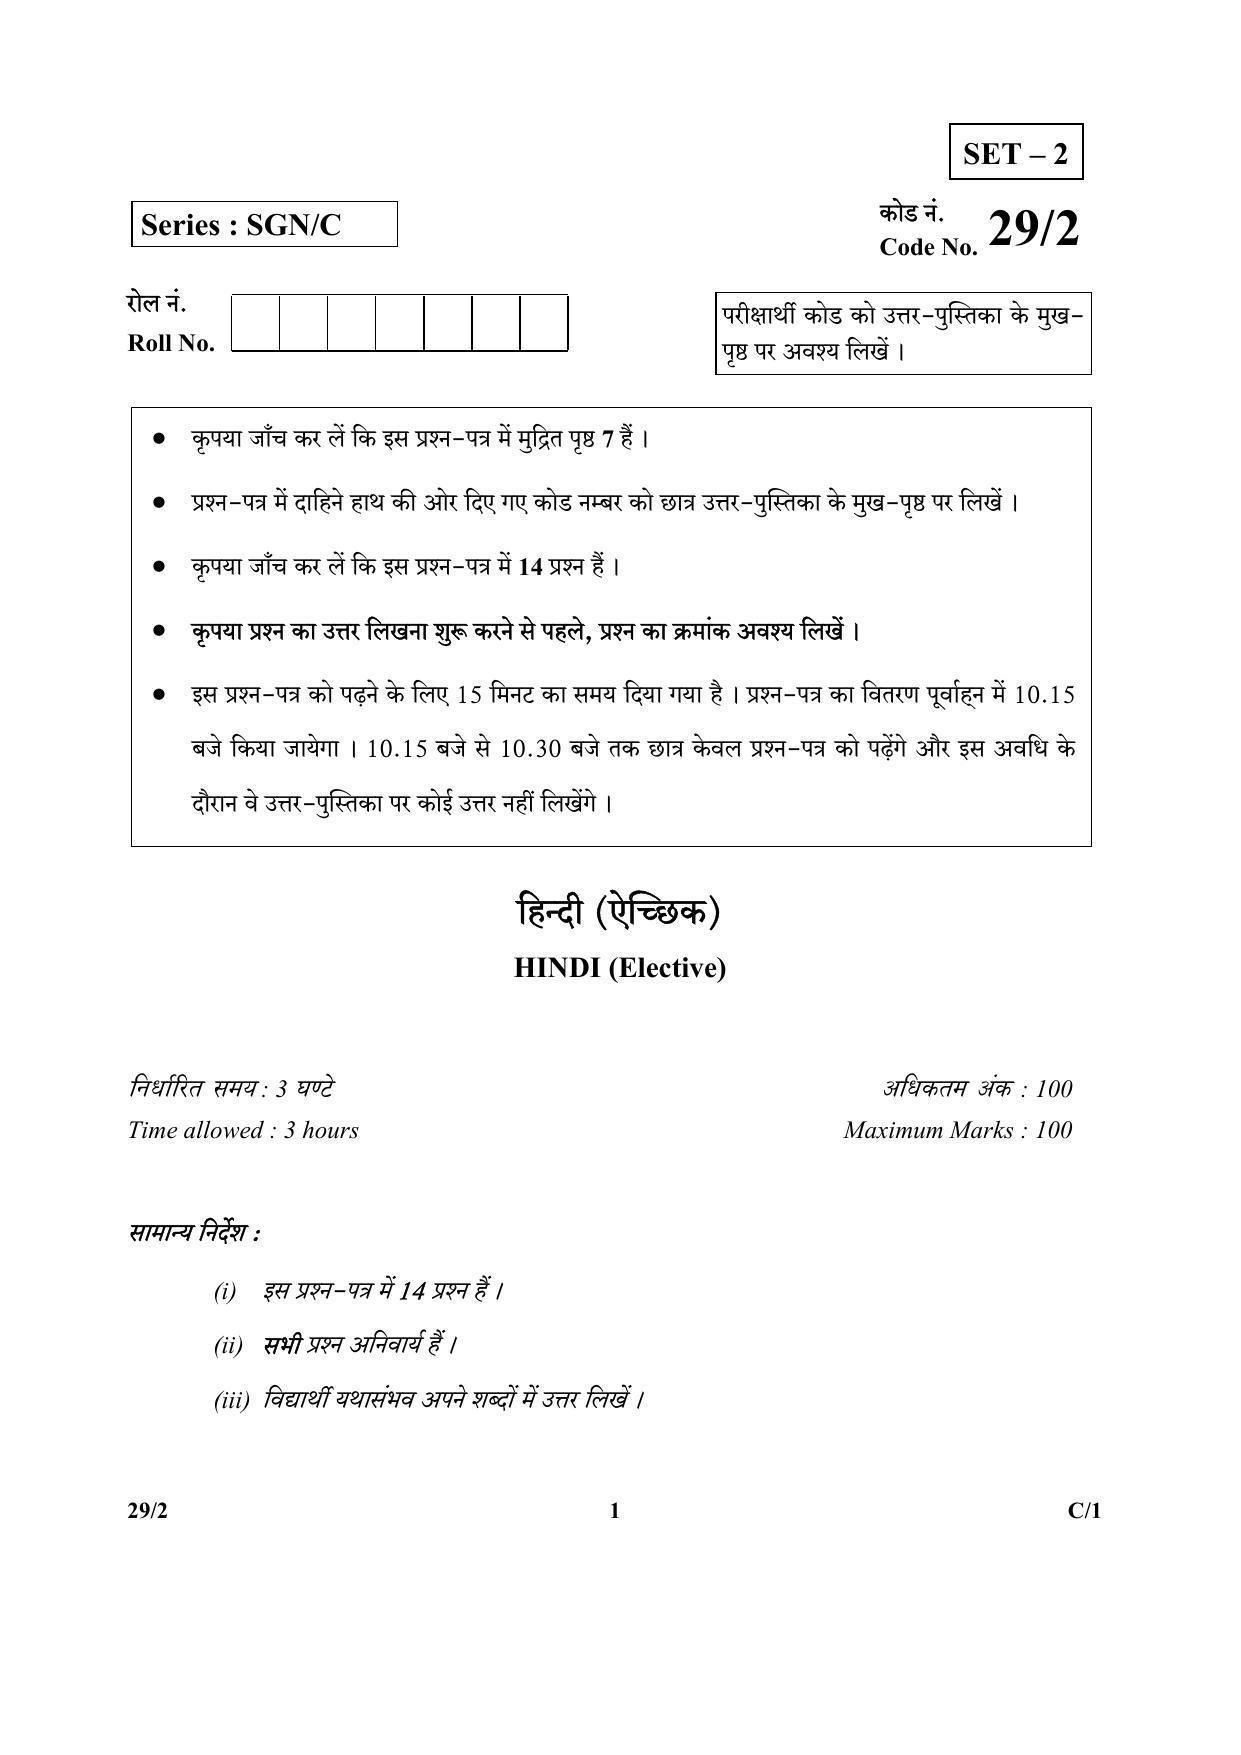 CBSE Class 12 29-2 (Hindi Elective) 2018 Compartment Question Paper - Page 1